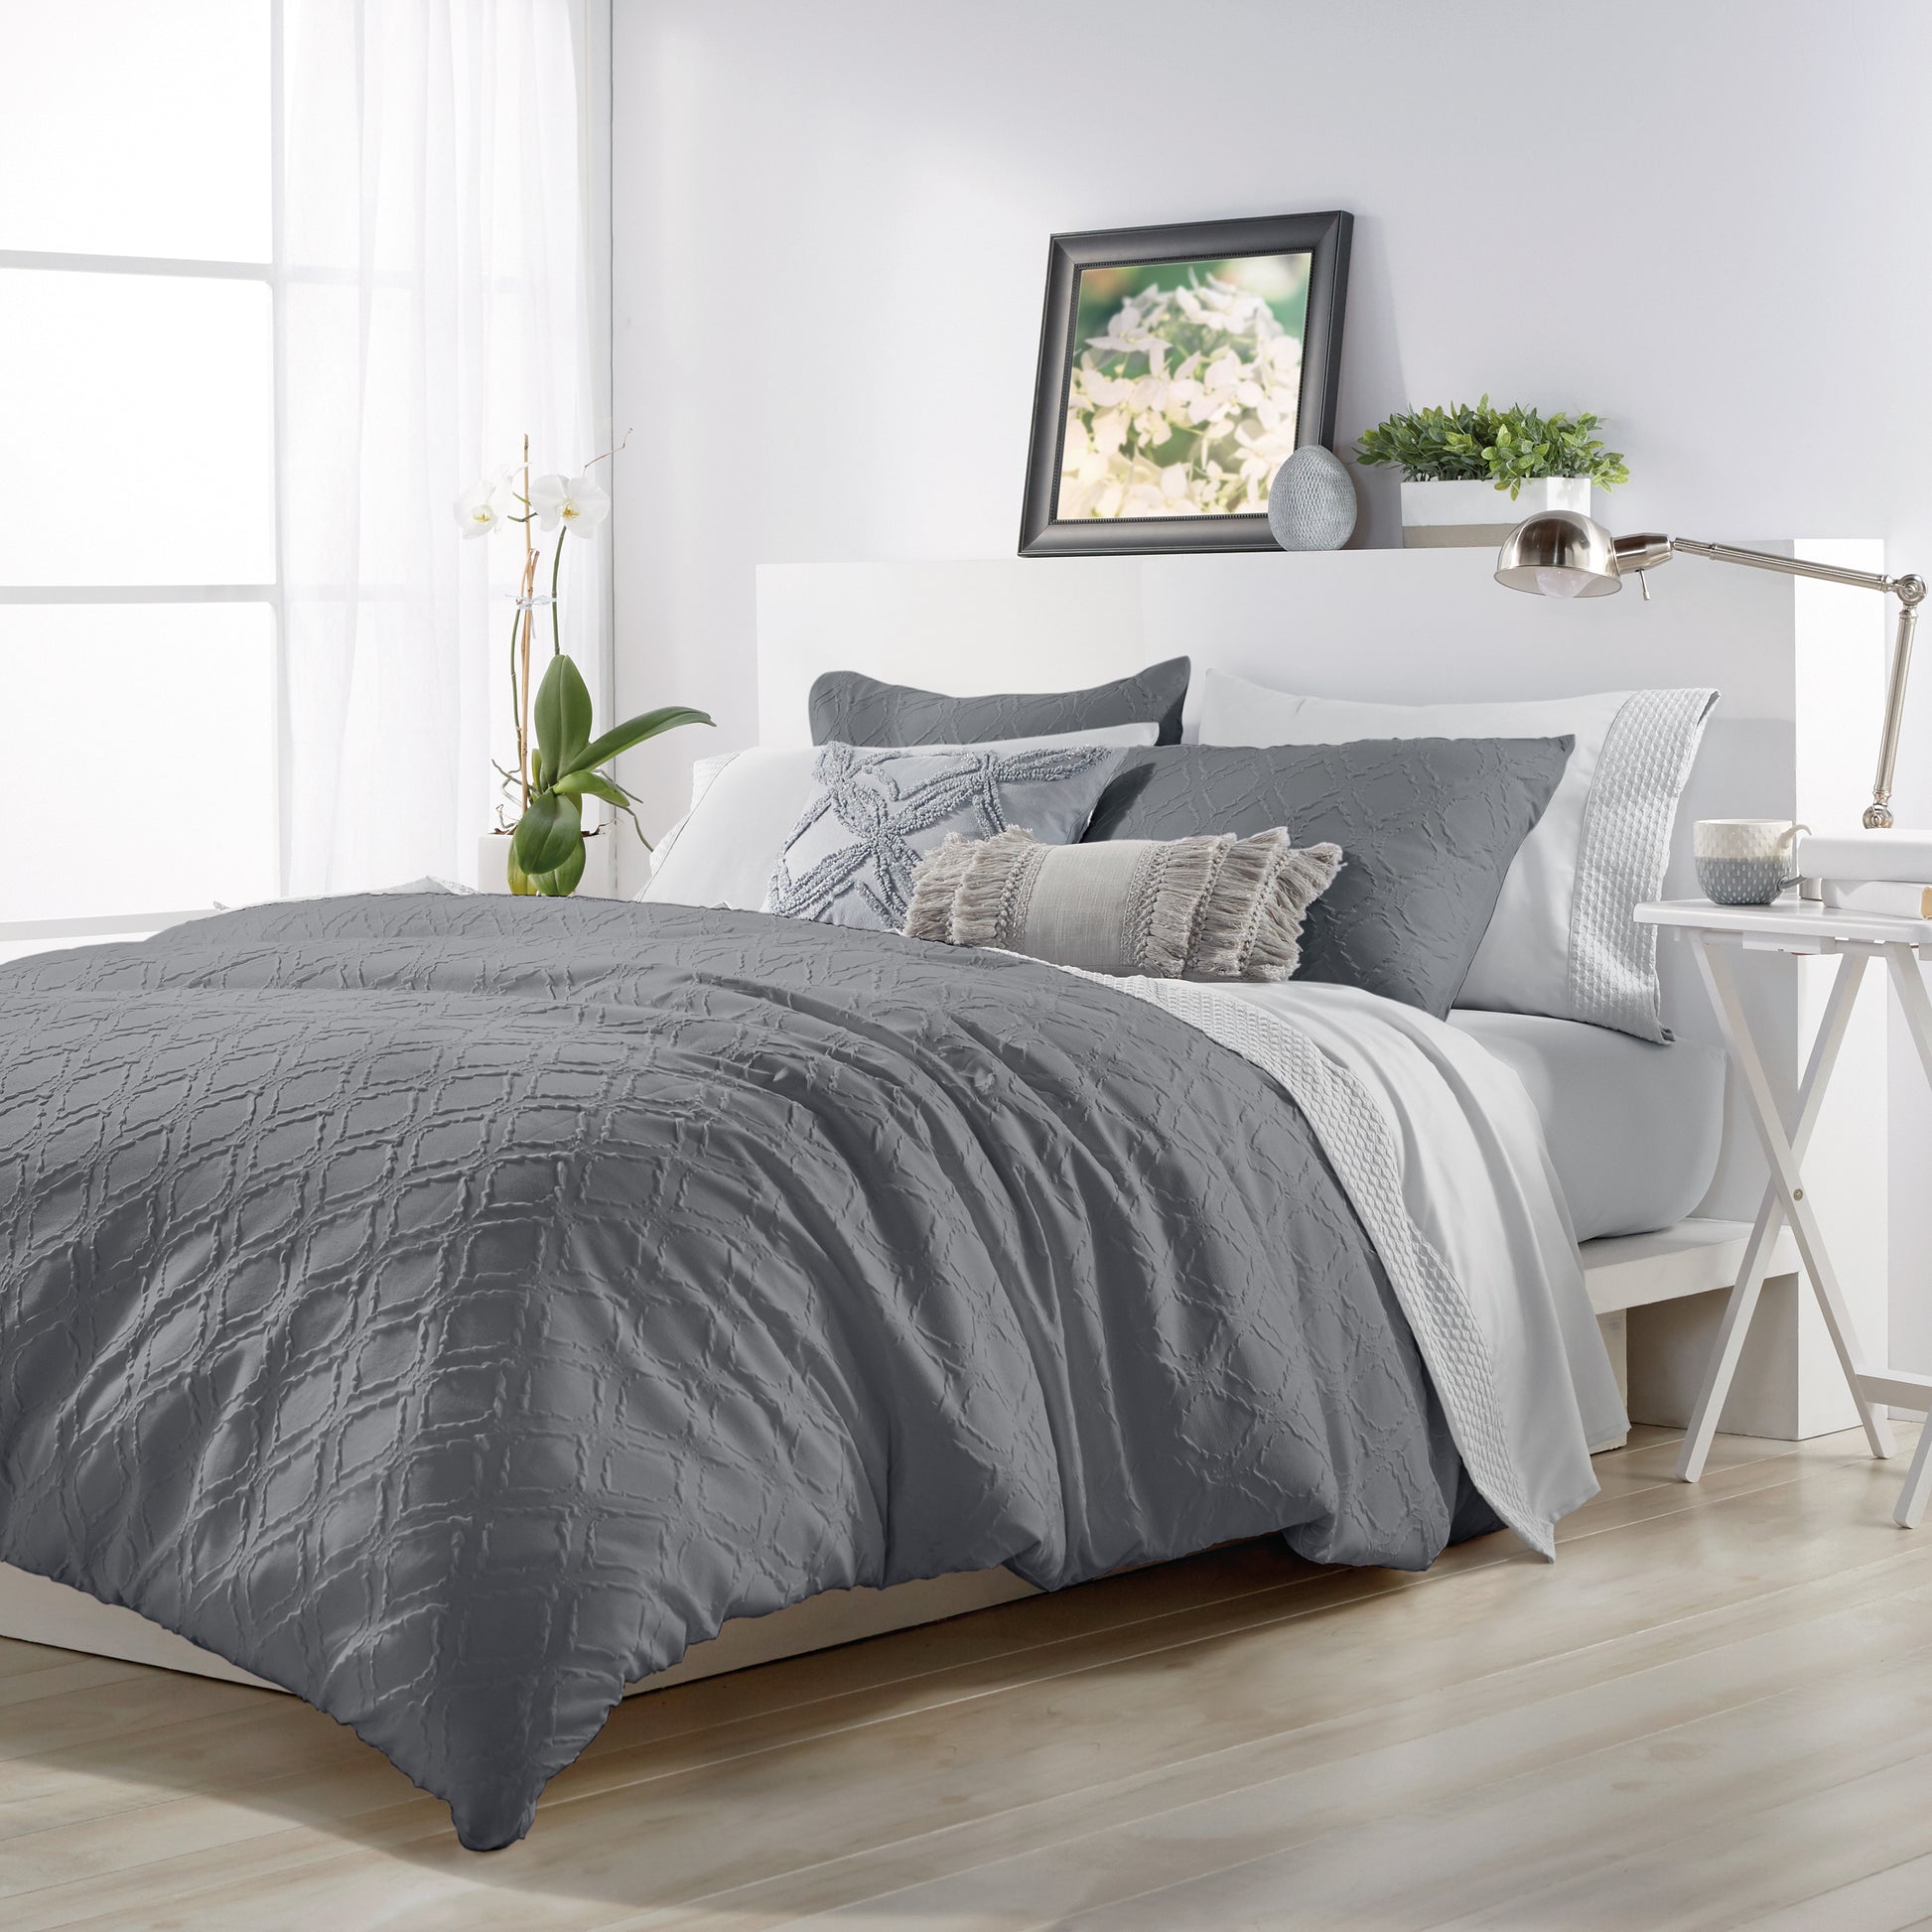 Microsculpt Solid Ogee Comforter Set charcoal